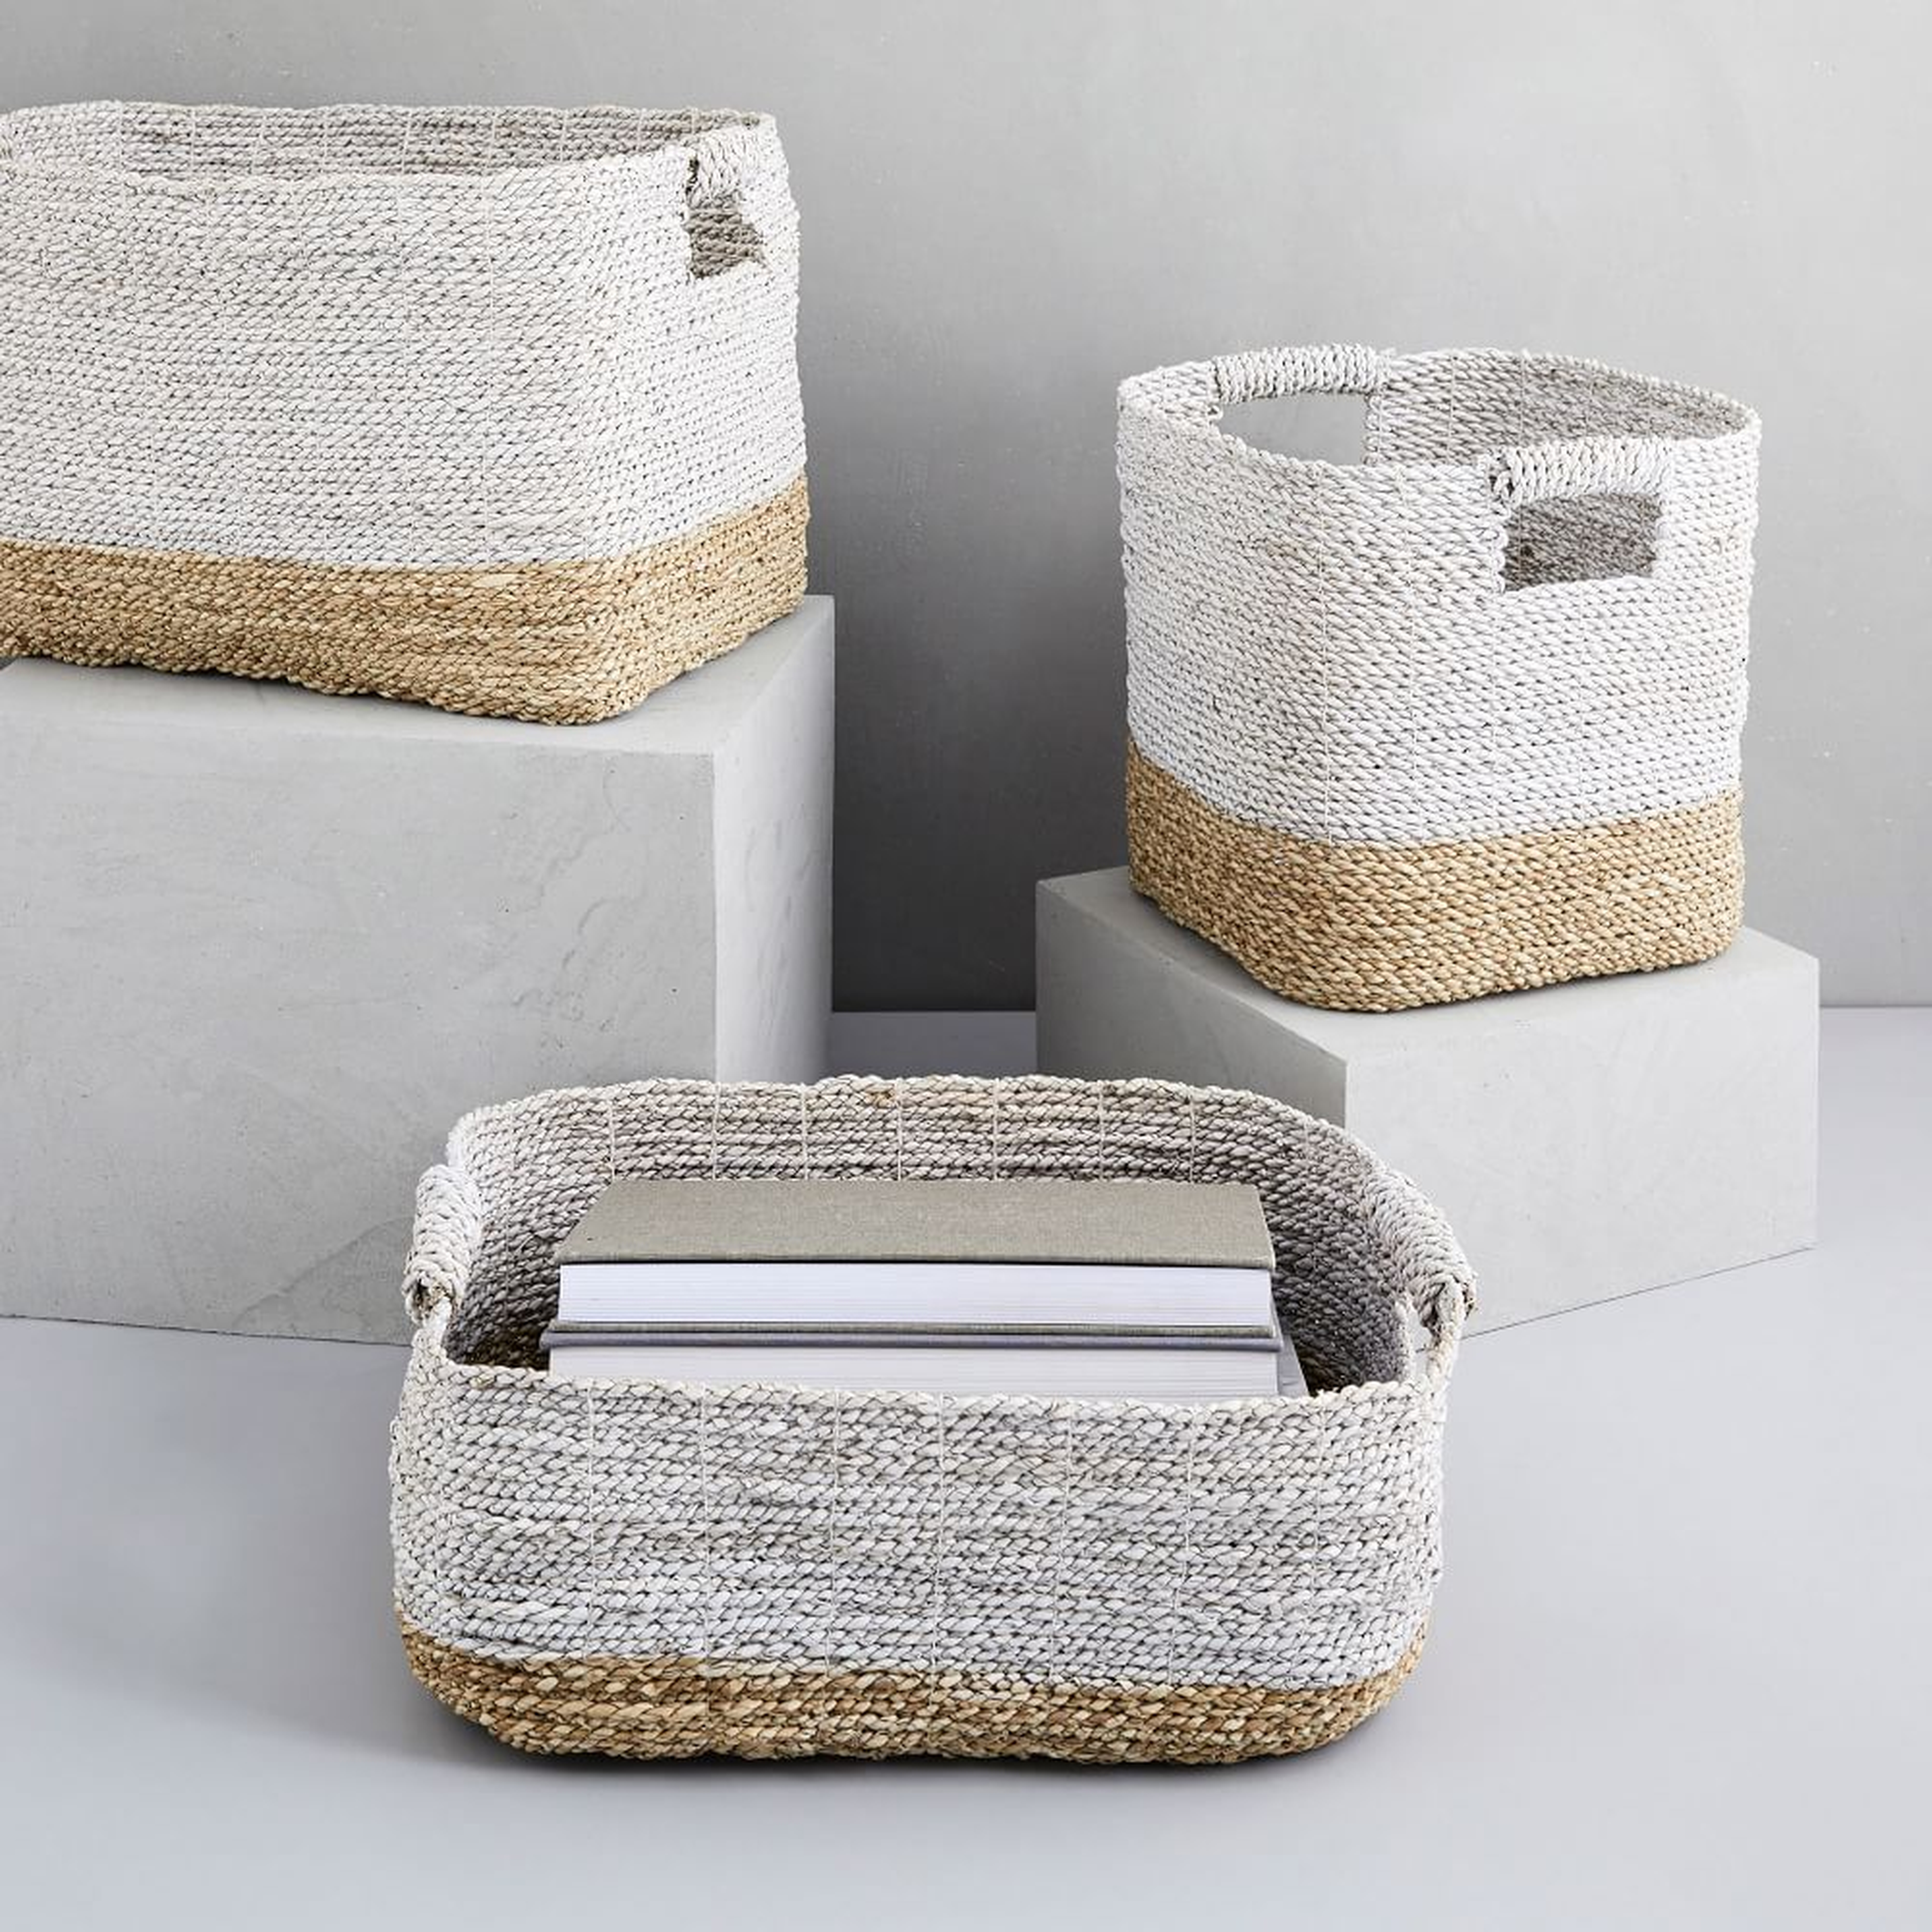 Two-Tone Woven Baskets, Natural + White, Set of 3 - West Elm